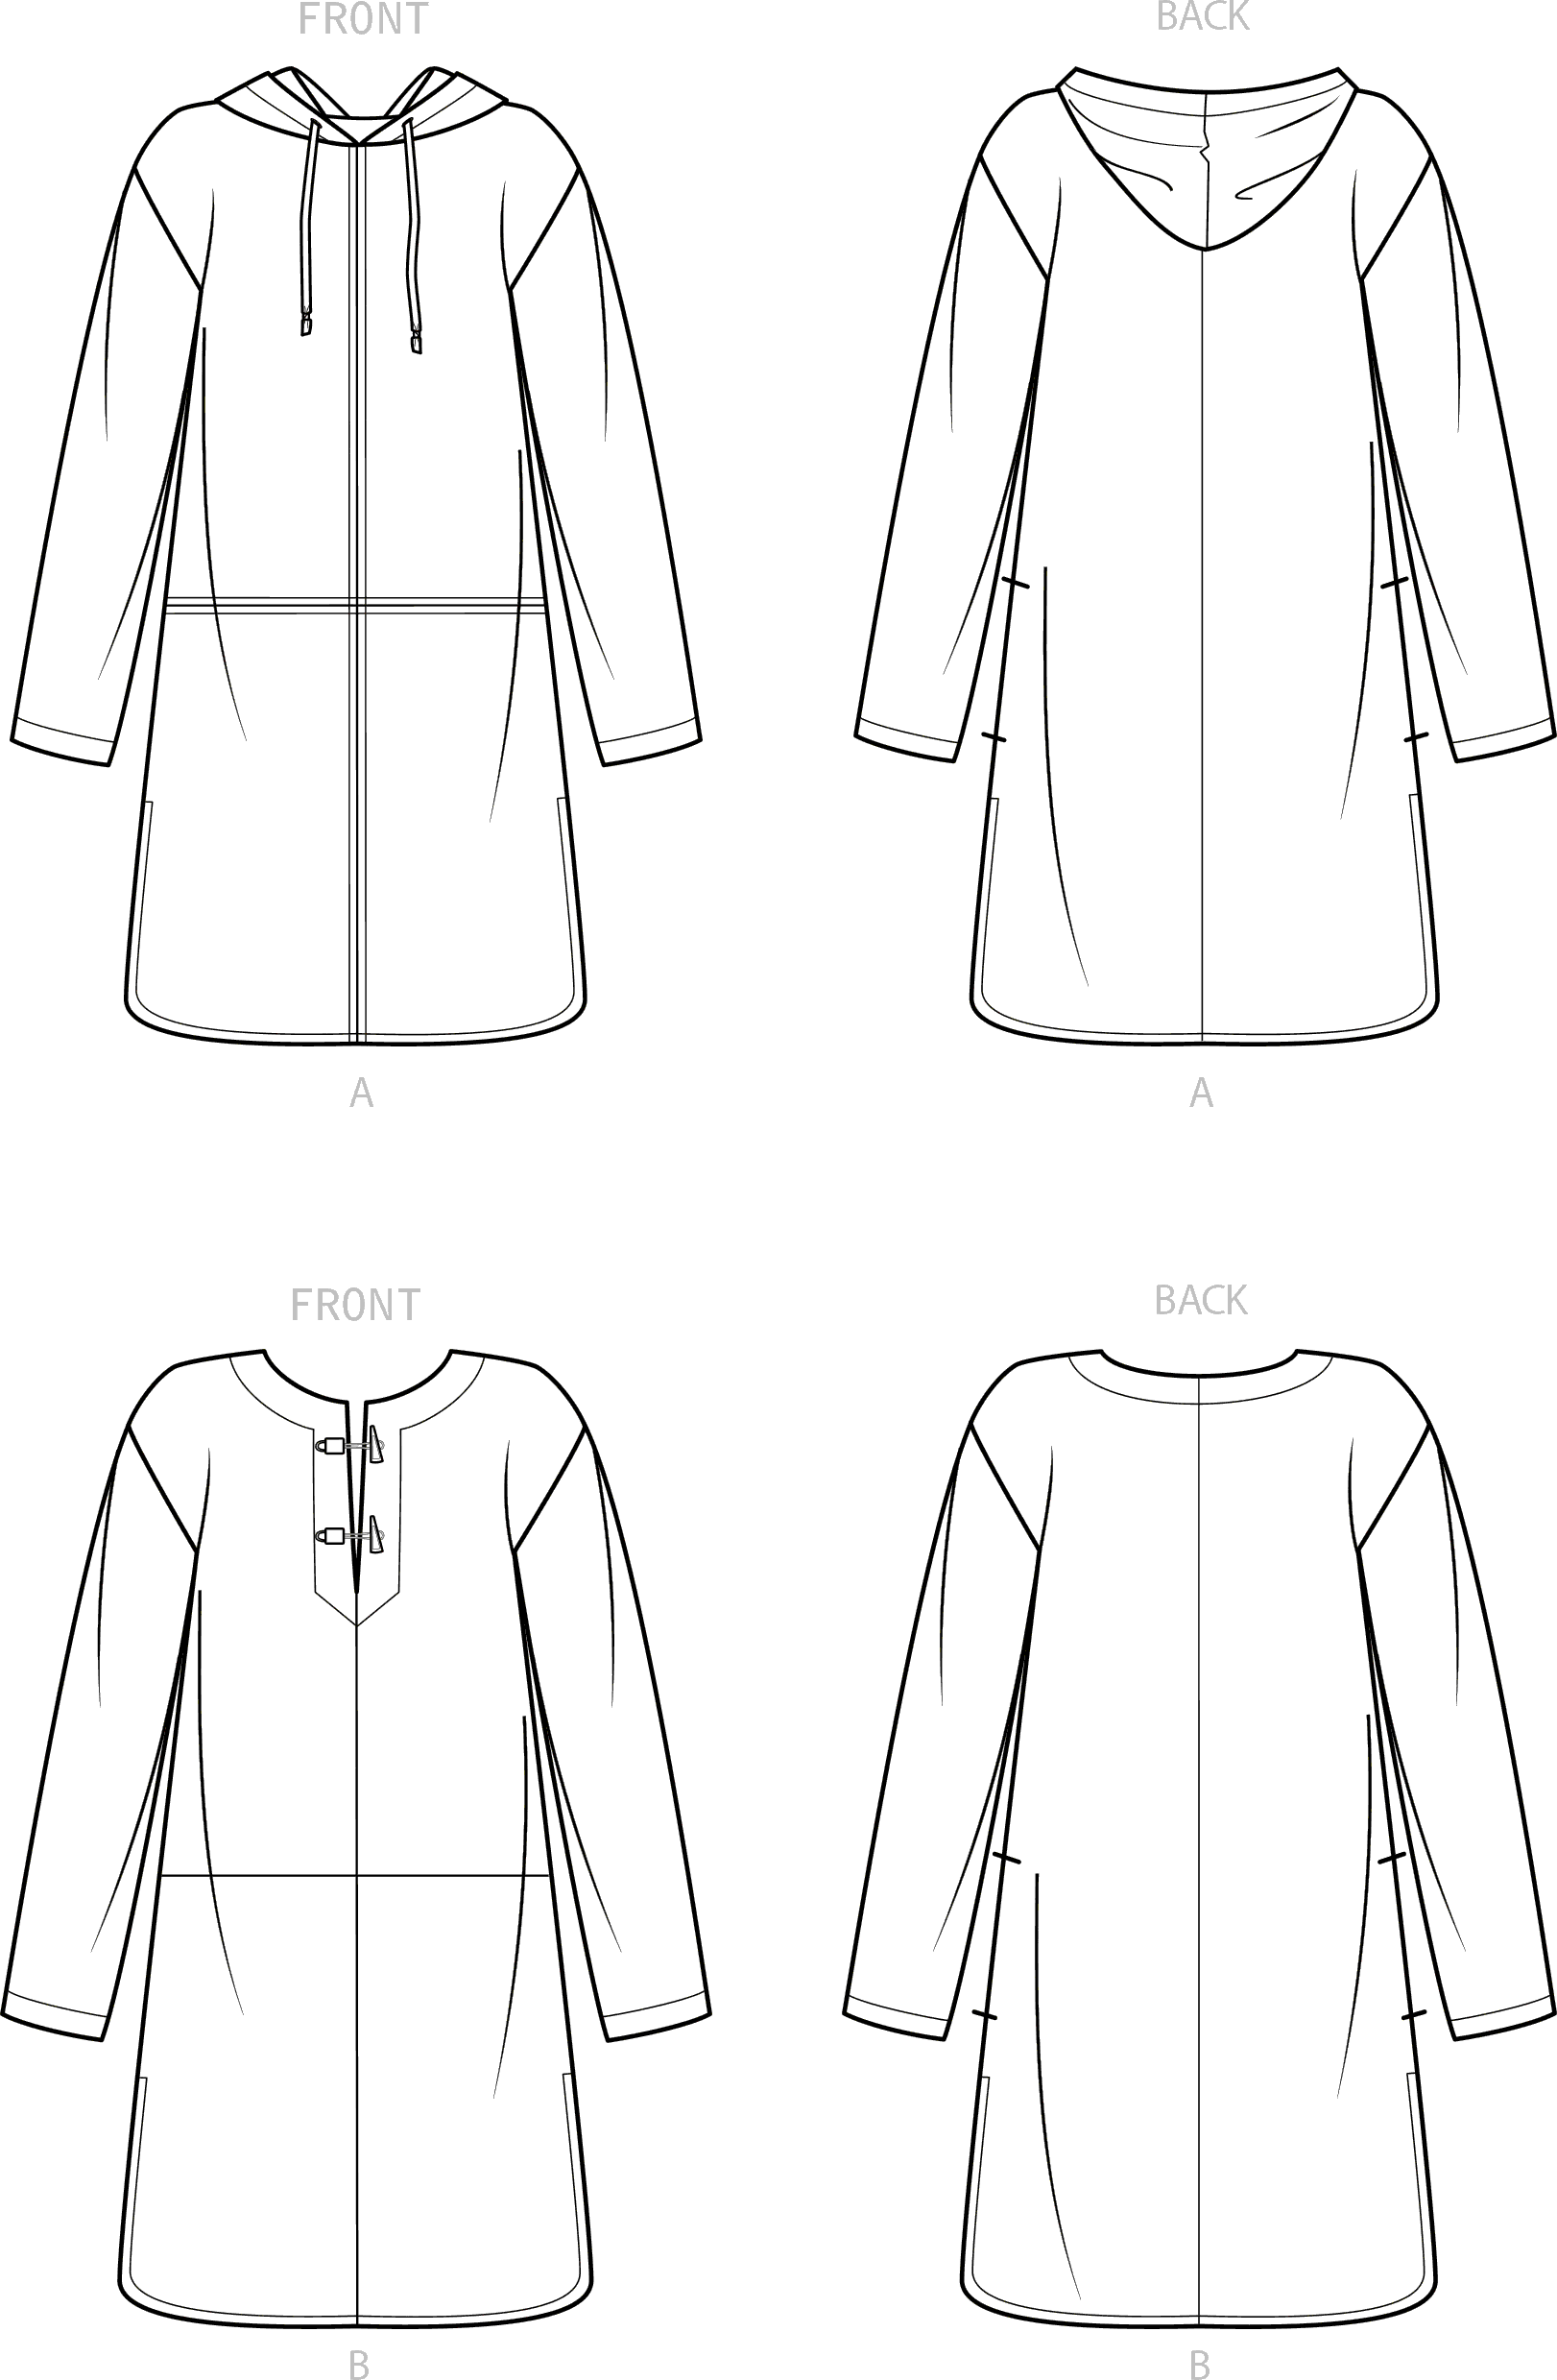 New Look Sewing Pattern N6706 Misses Jackets 6706 Line Art From Patternsandplains.com